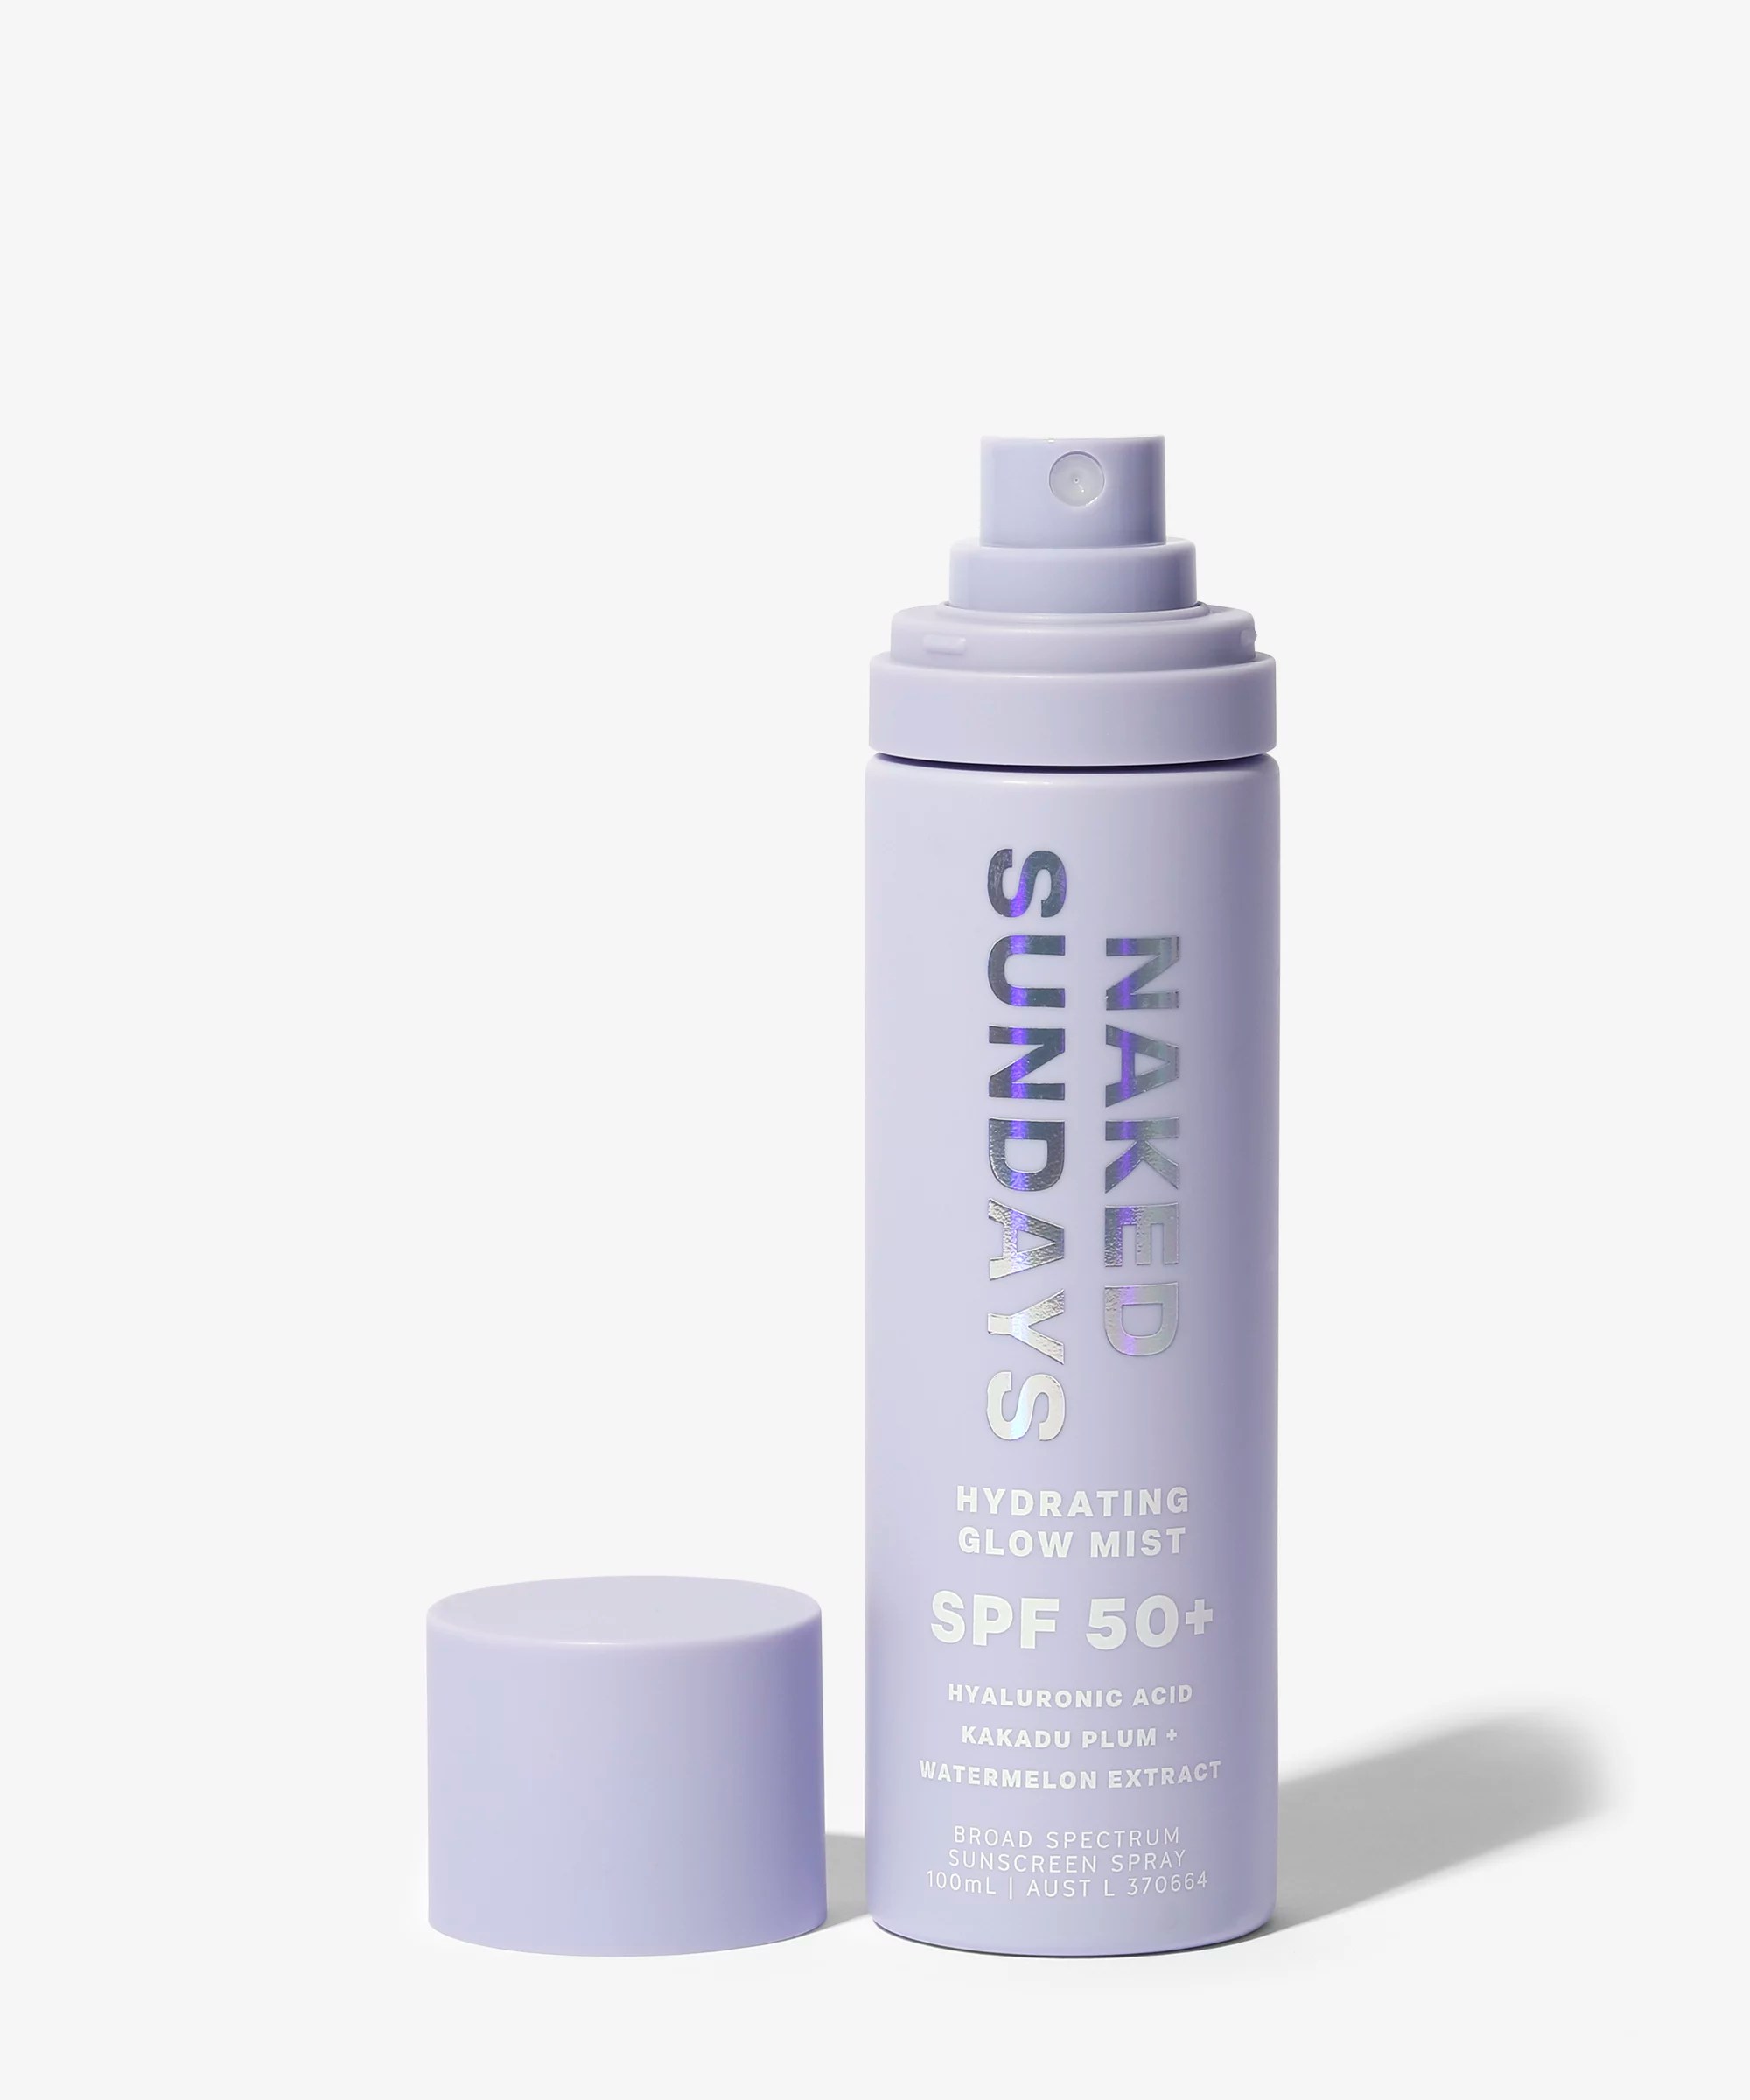 Naked Sundays SPF 50 Hydrating Glow Mist Top Up, sunscreen spray for face